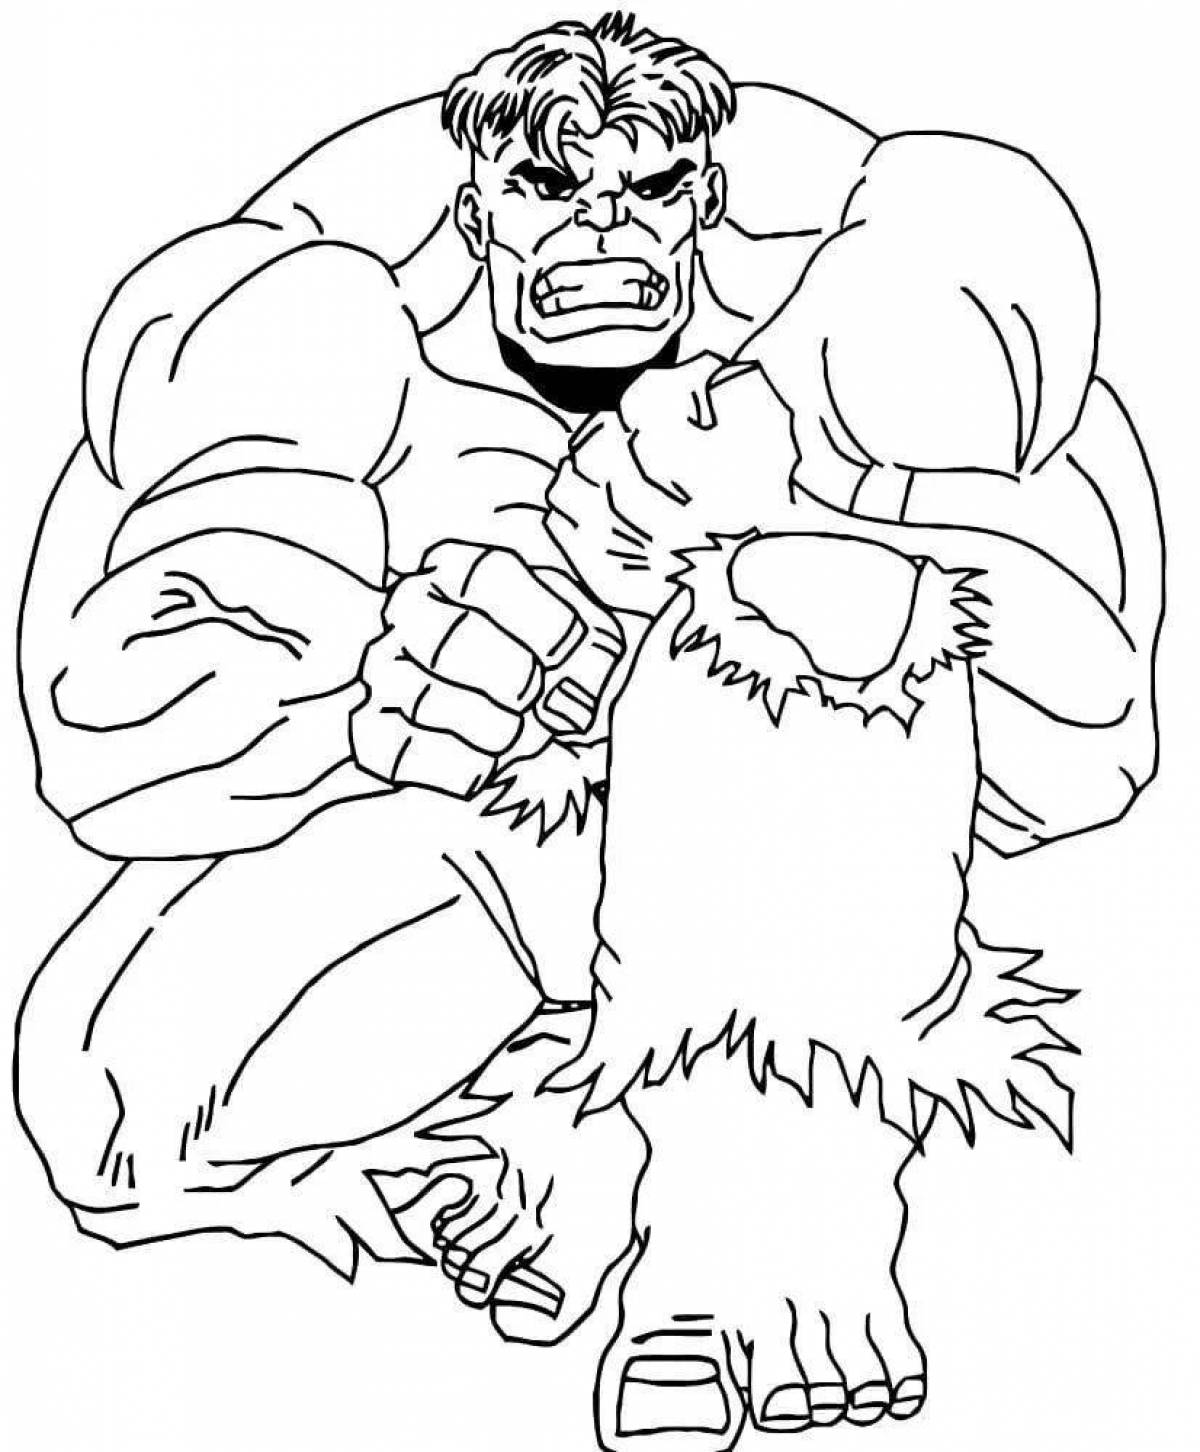 Charming Hulk coloring book for children 6-7 years old